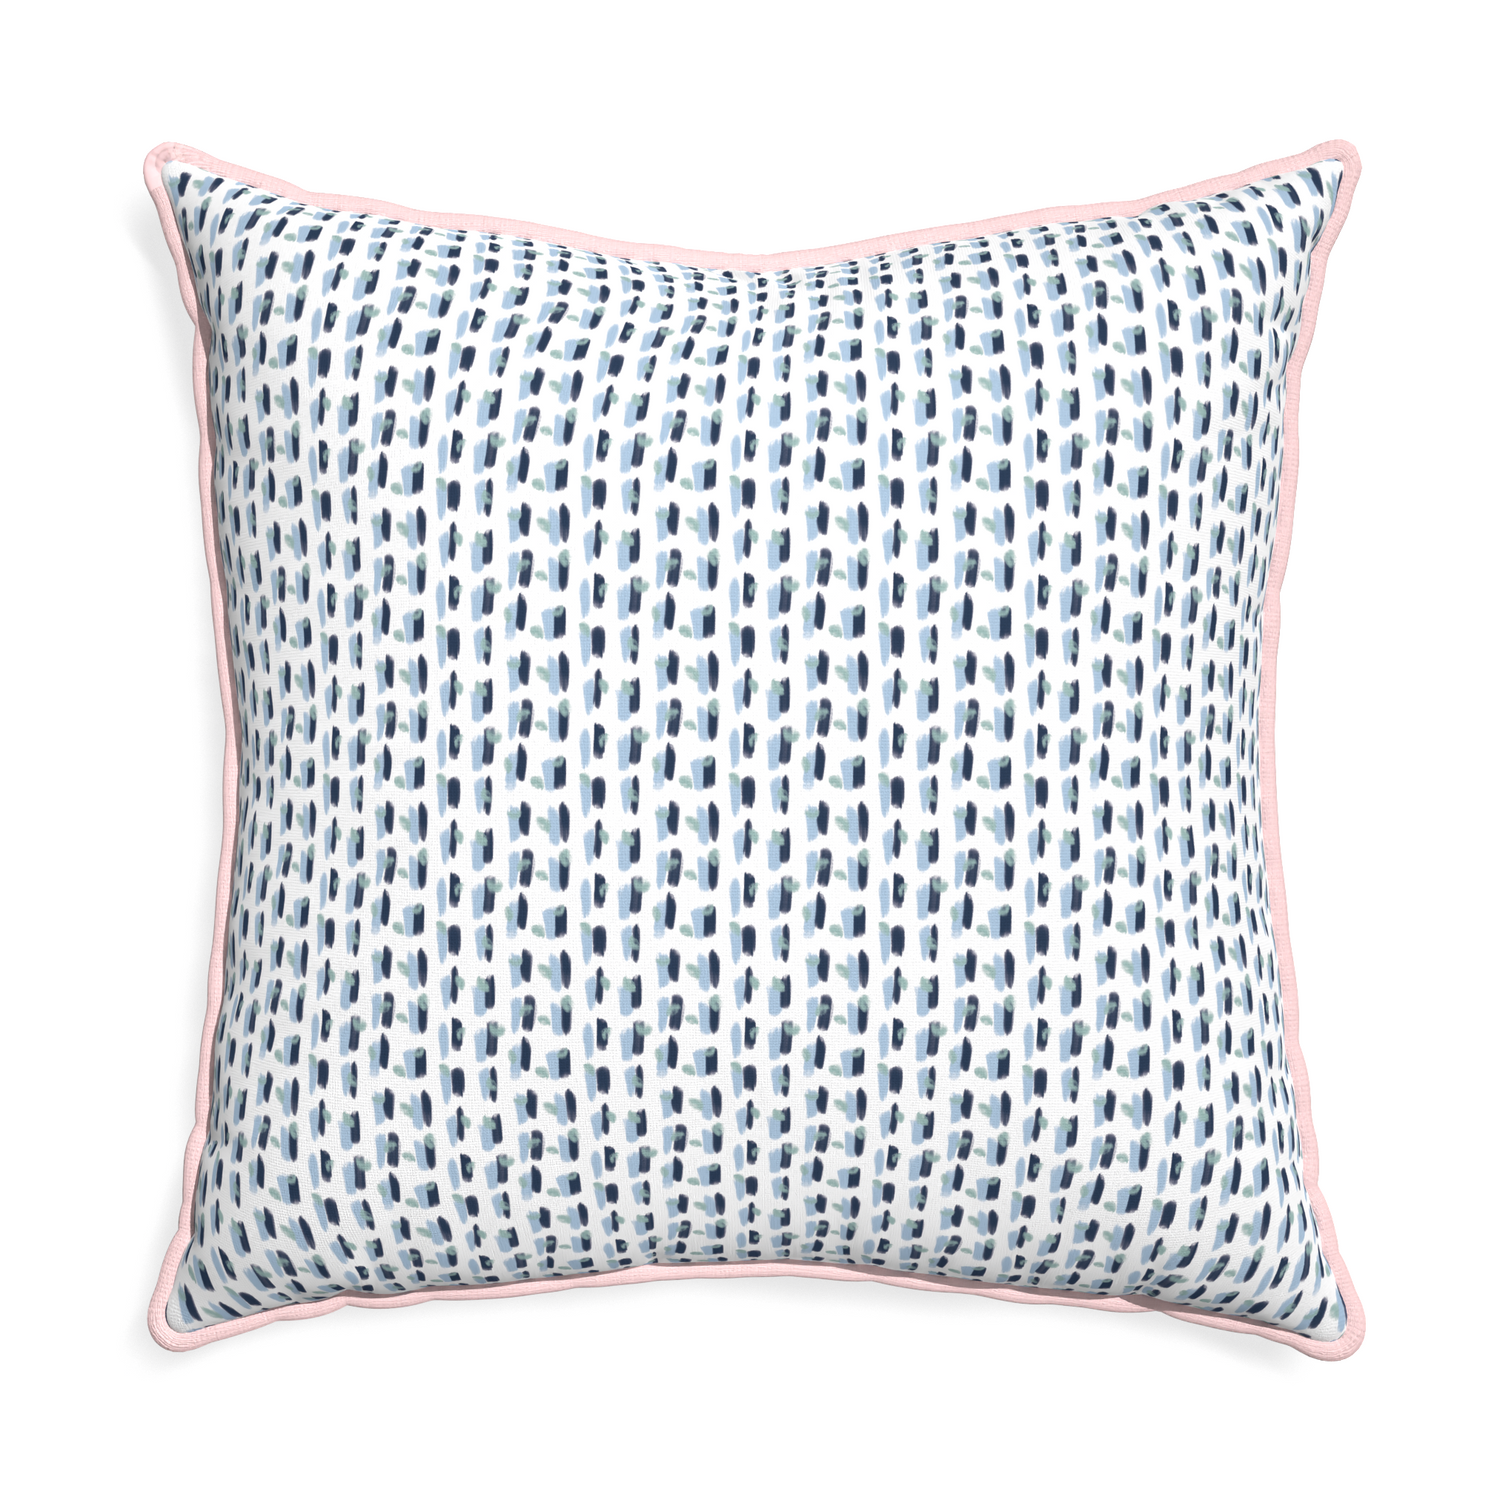 Euro-sham poppy blue custom pillow with petal piping on white background